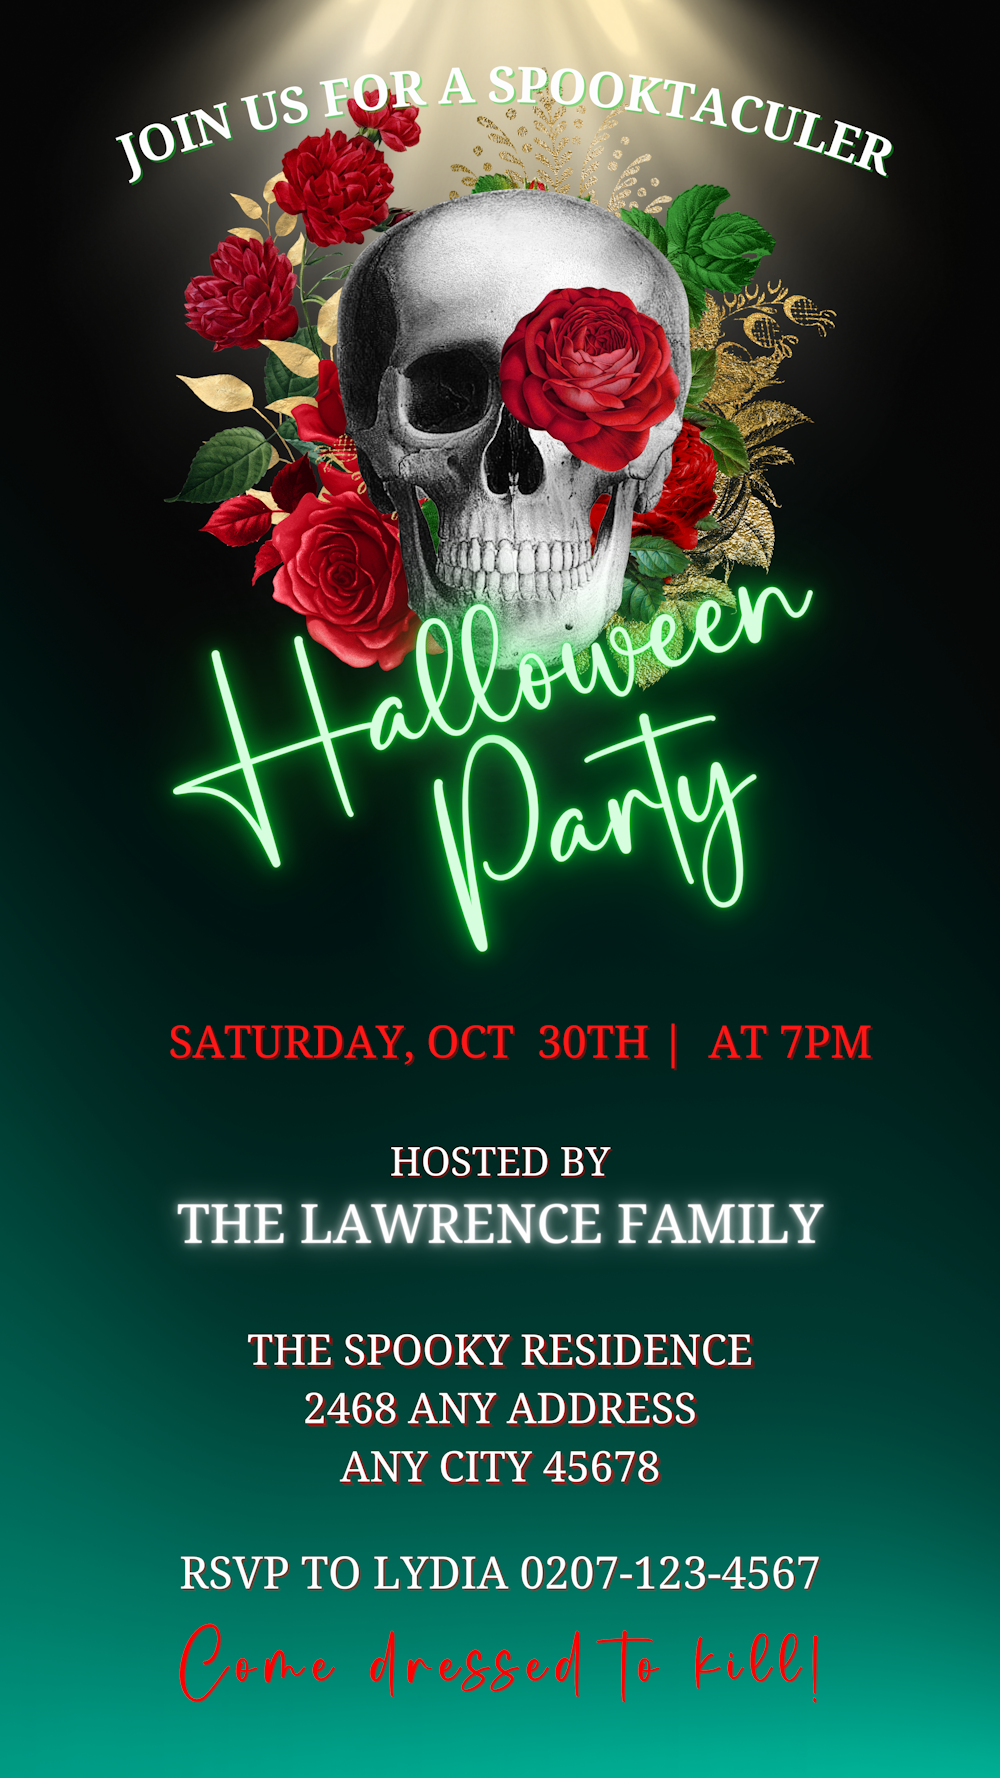 Red Rose Illuminated Skull Halloween Evite featuring a skull adorned with red roses and customizable text for party invitations in digital format.